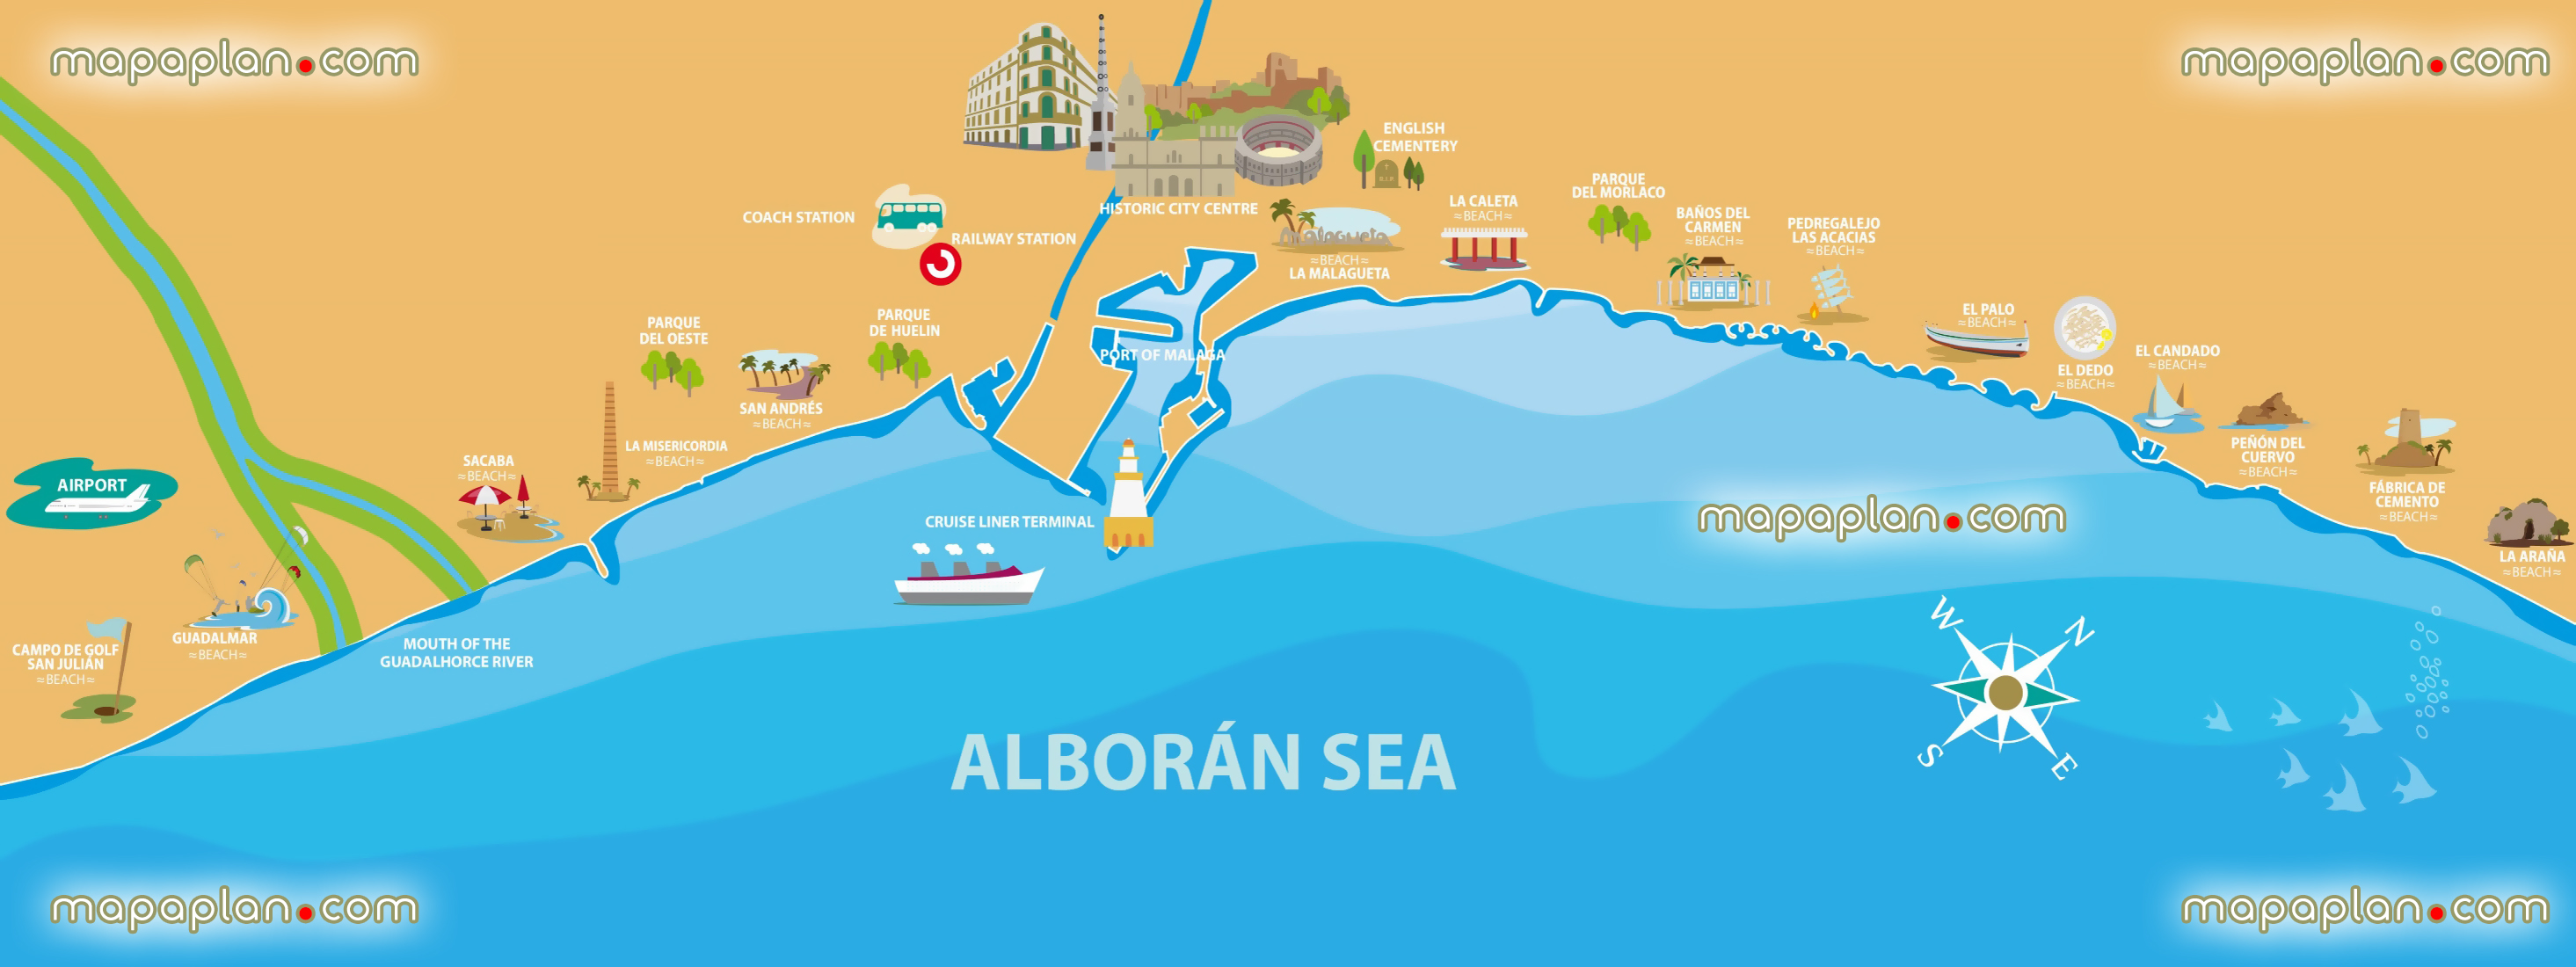 malaga beach detailed itinerary popout interactive historical places what see where go directions interesting things do illustrated children family english metro region historic city centre port railway coach station aiport